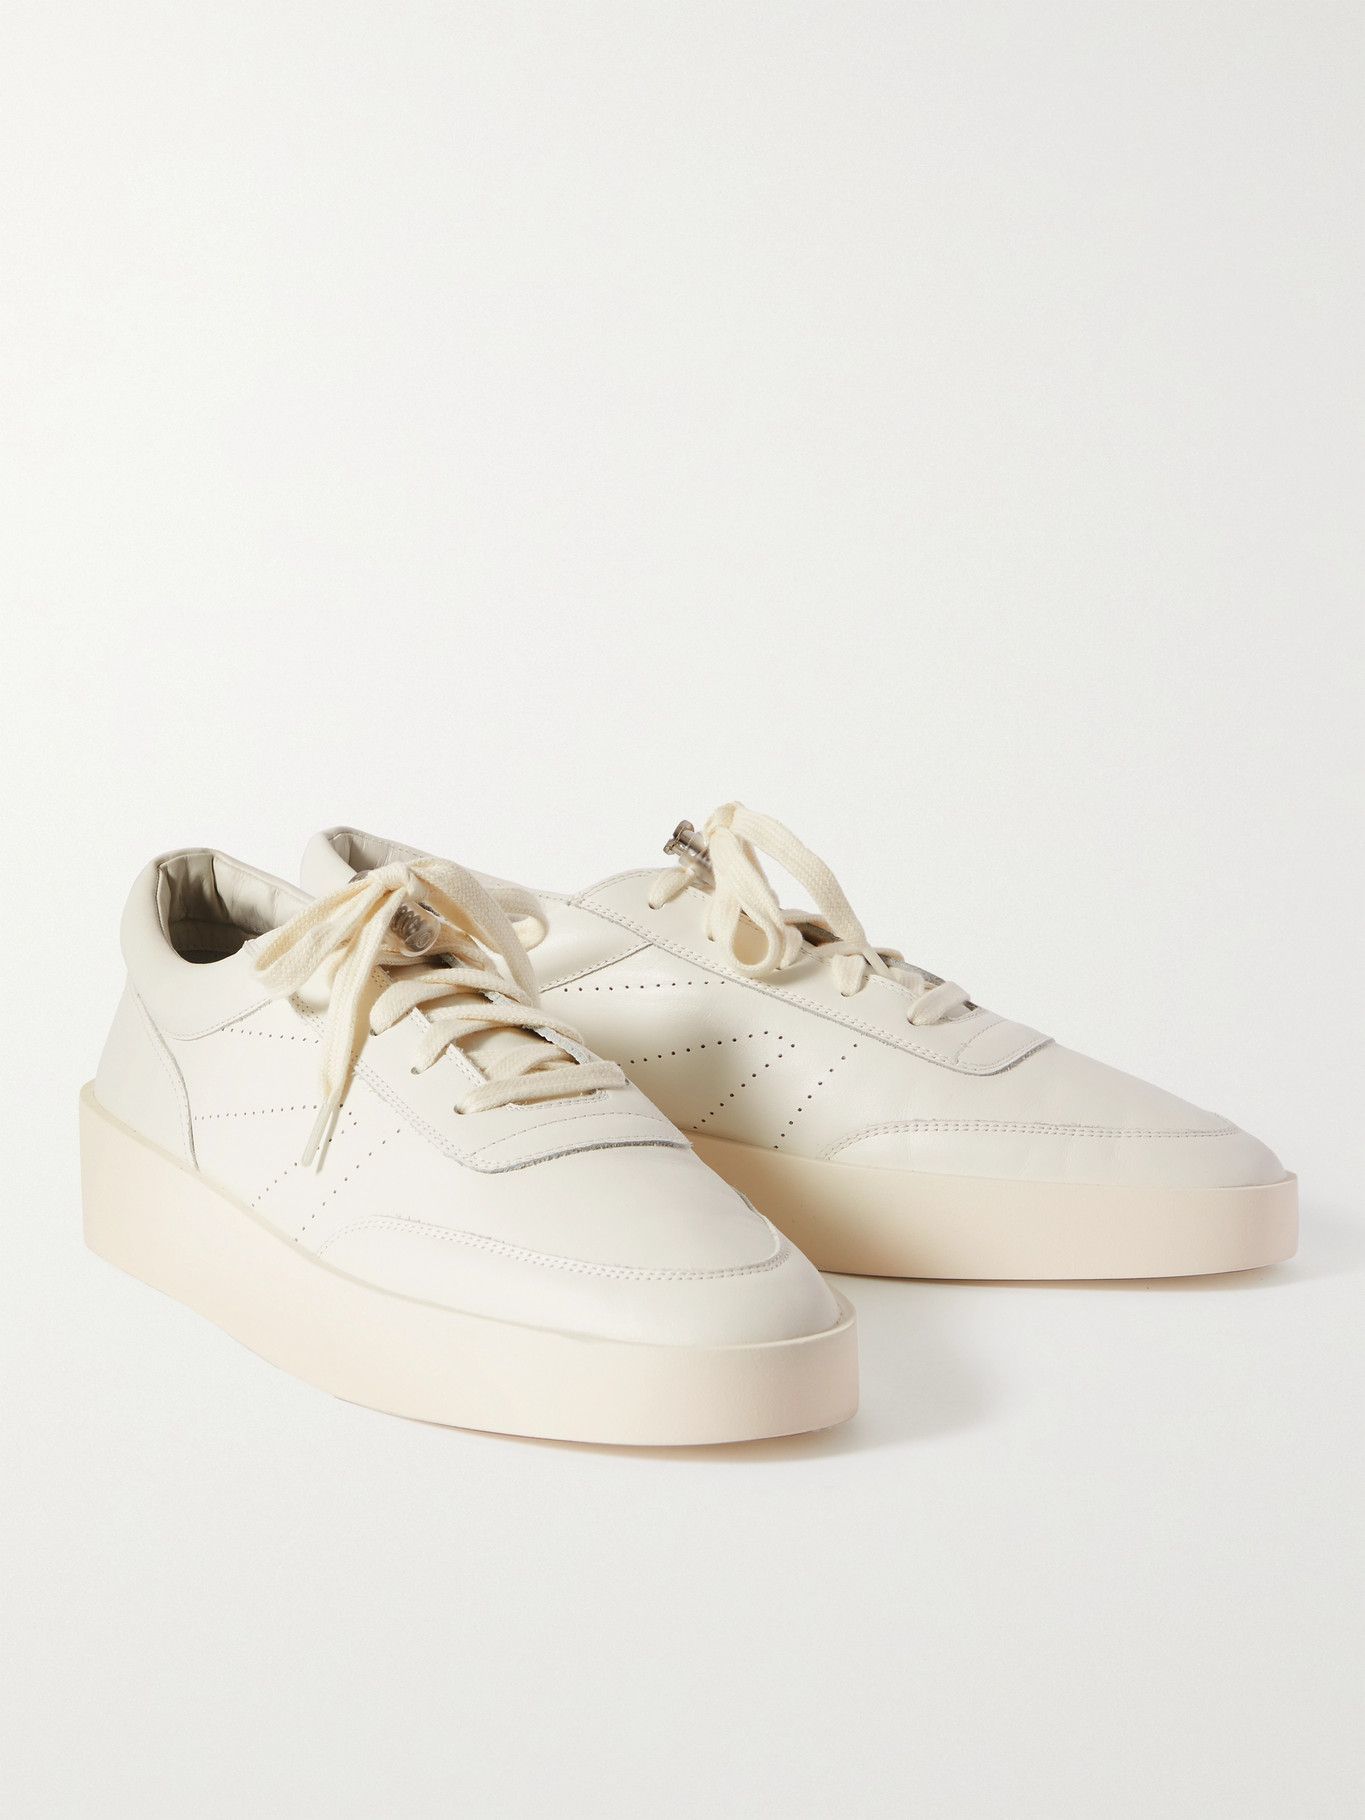 FEAR OF GOD - Leather Sneakers - White Fear Of God